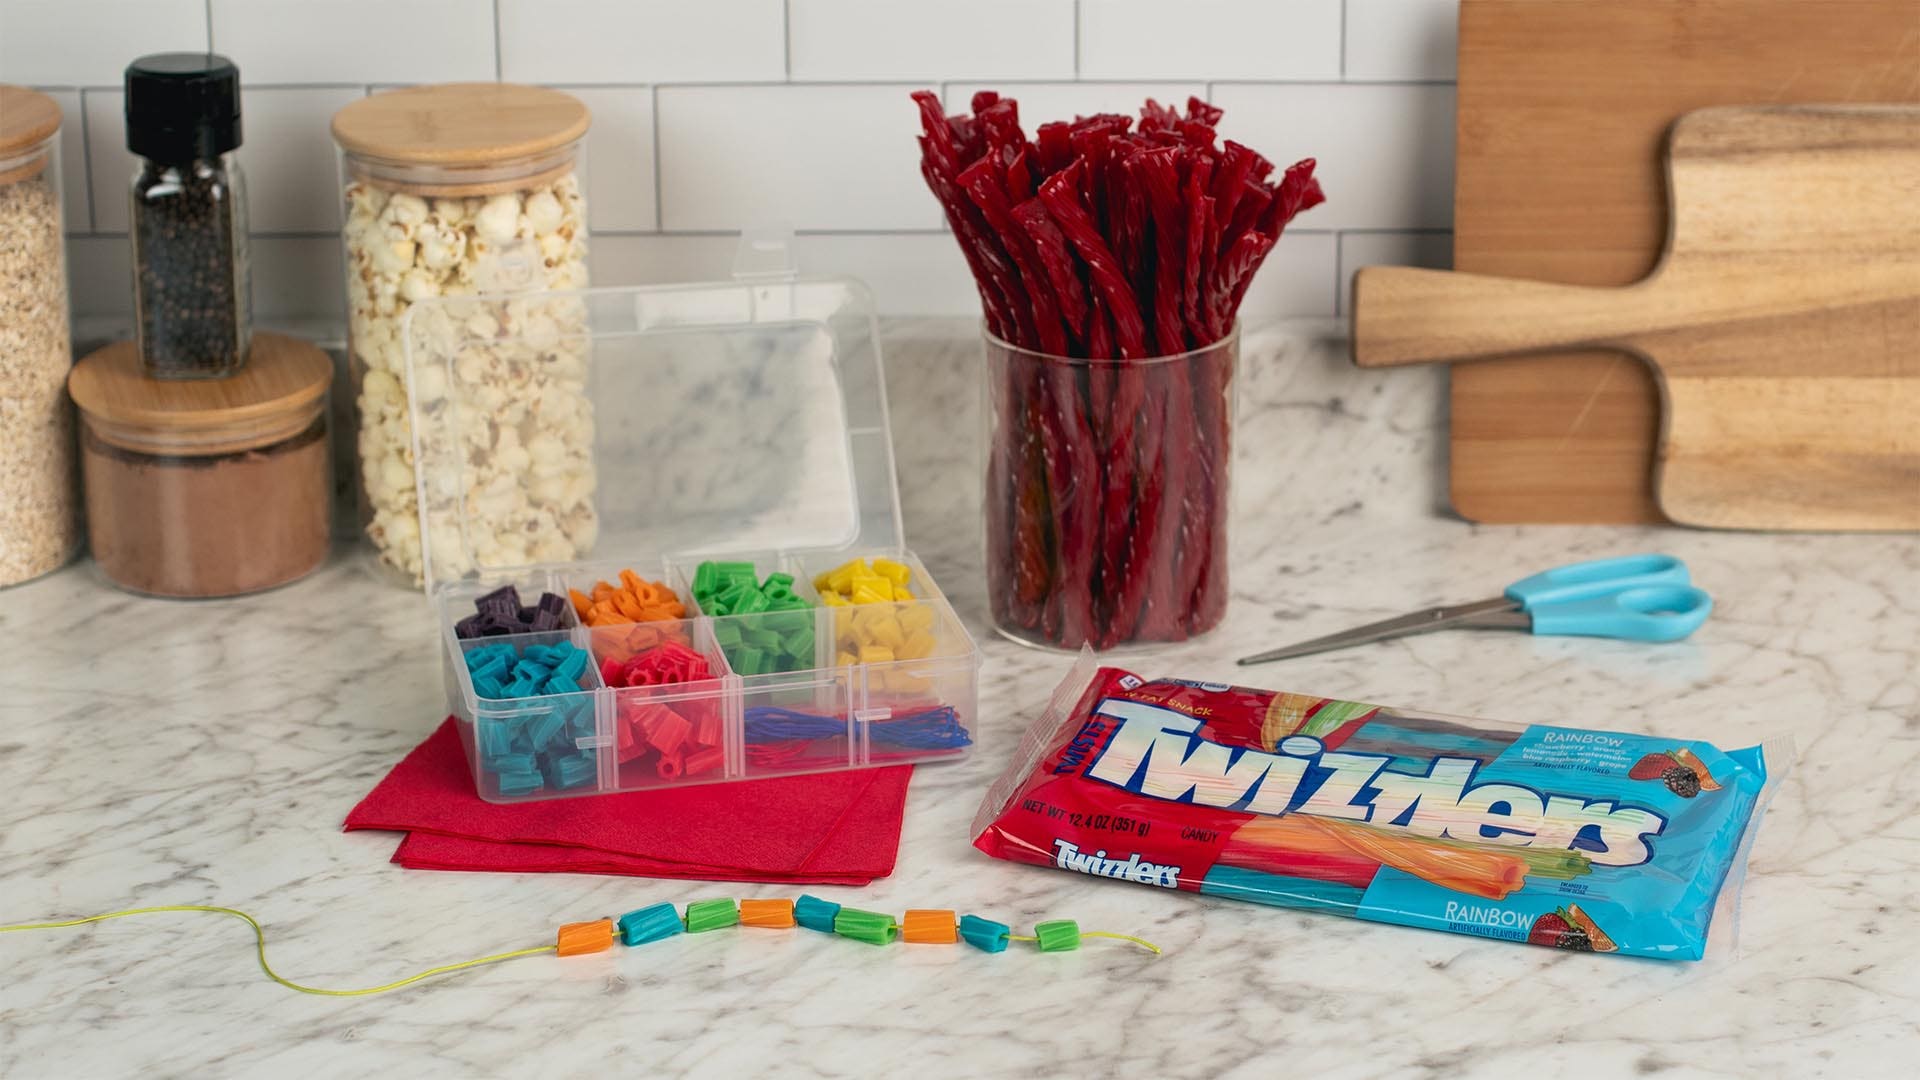 clear jewelry box filled with twizzlers rainbow candy cut into small pieces.